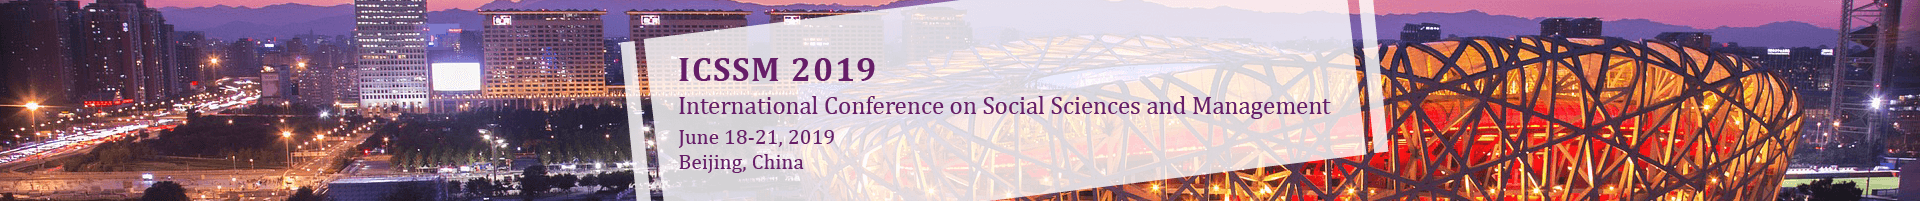 2019 ICSSM International Conference on Social Sciences and Management, Beijing, China